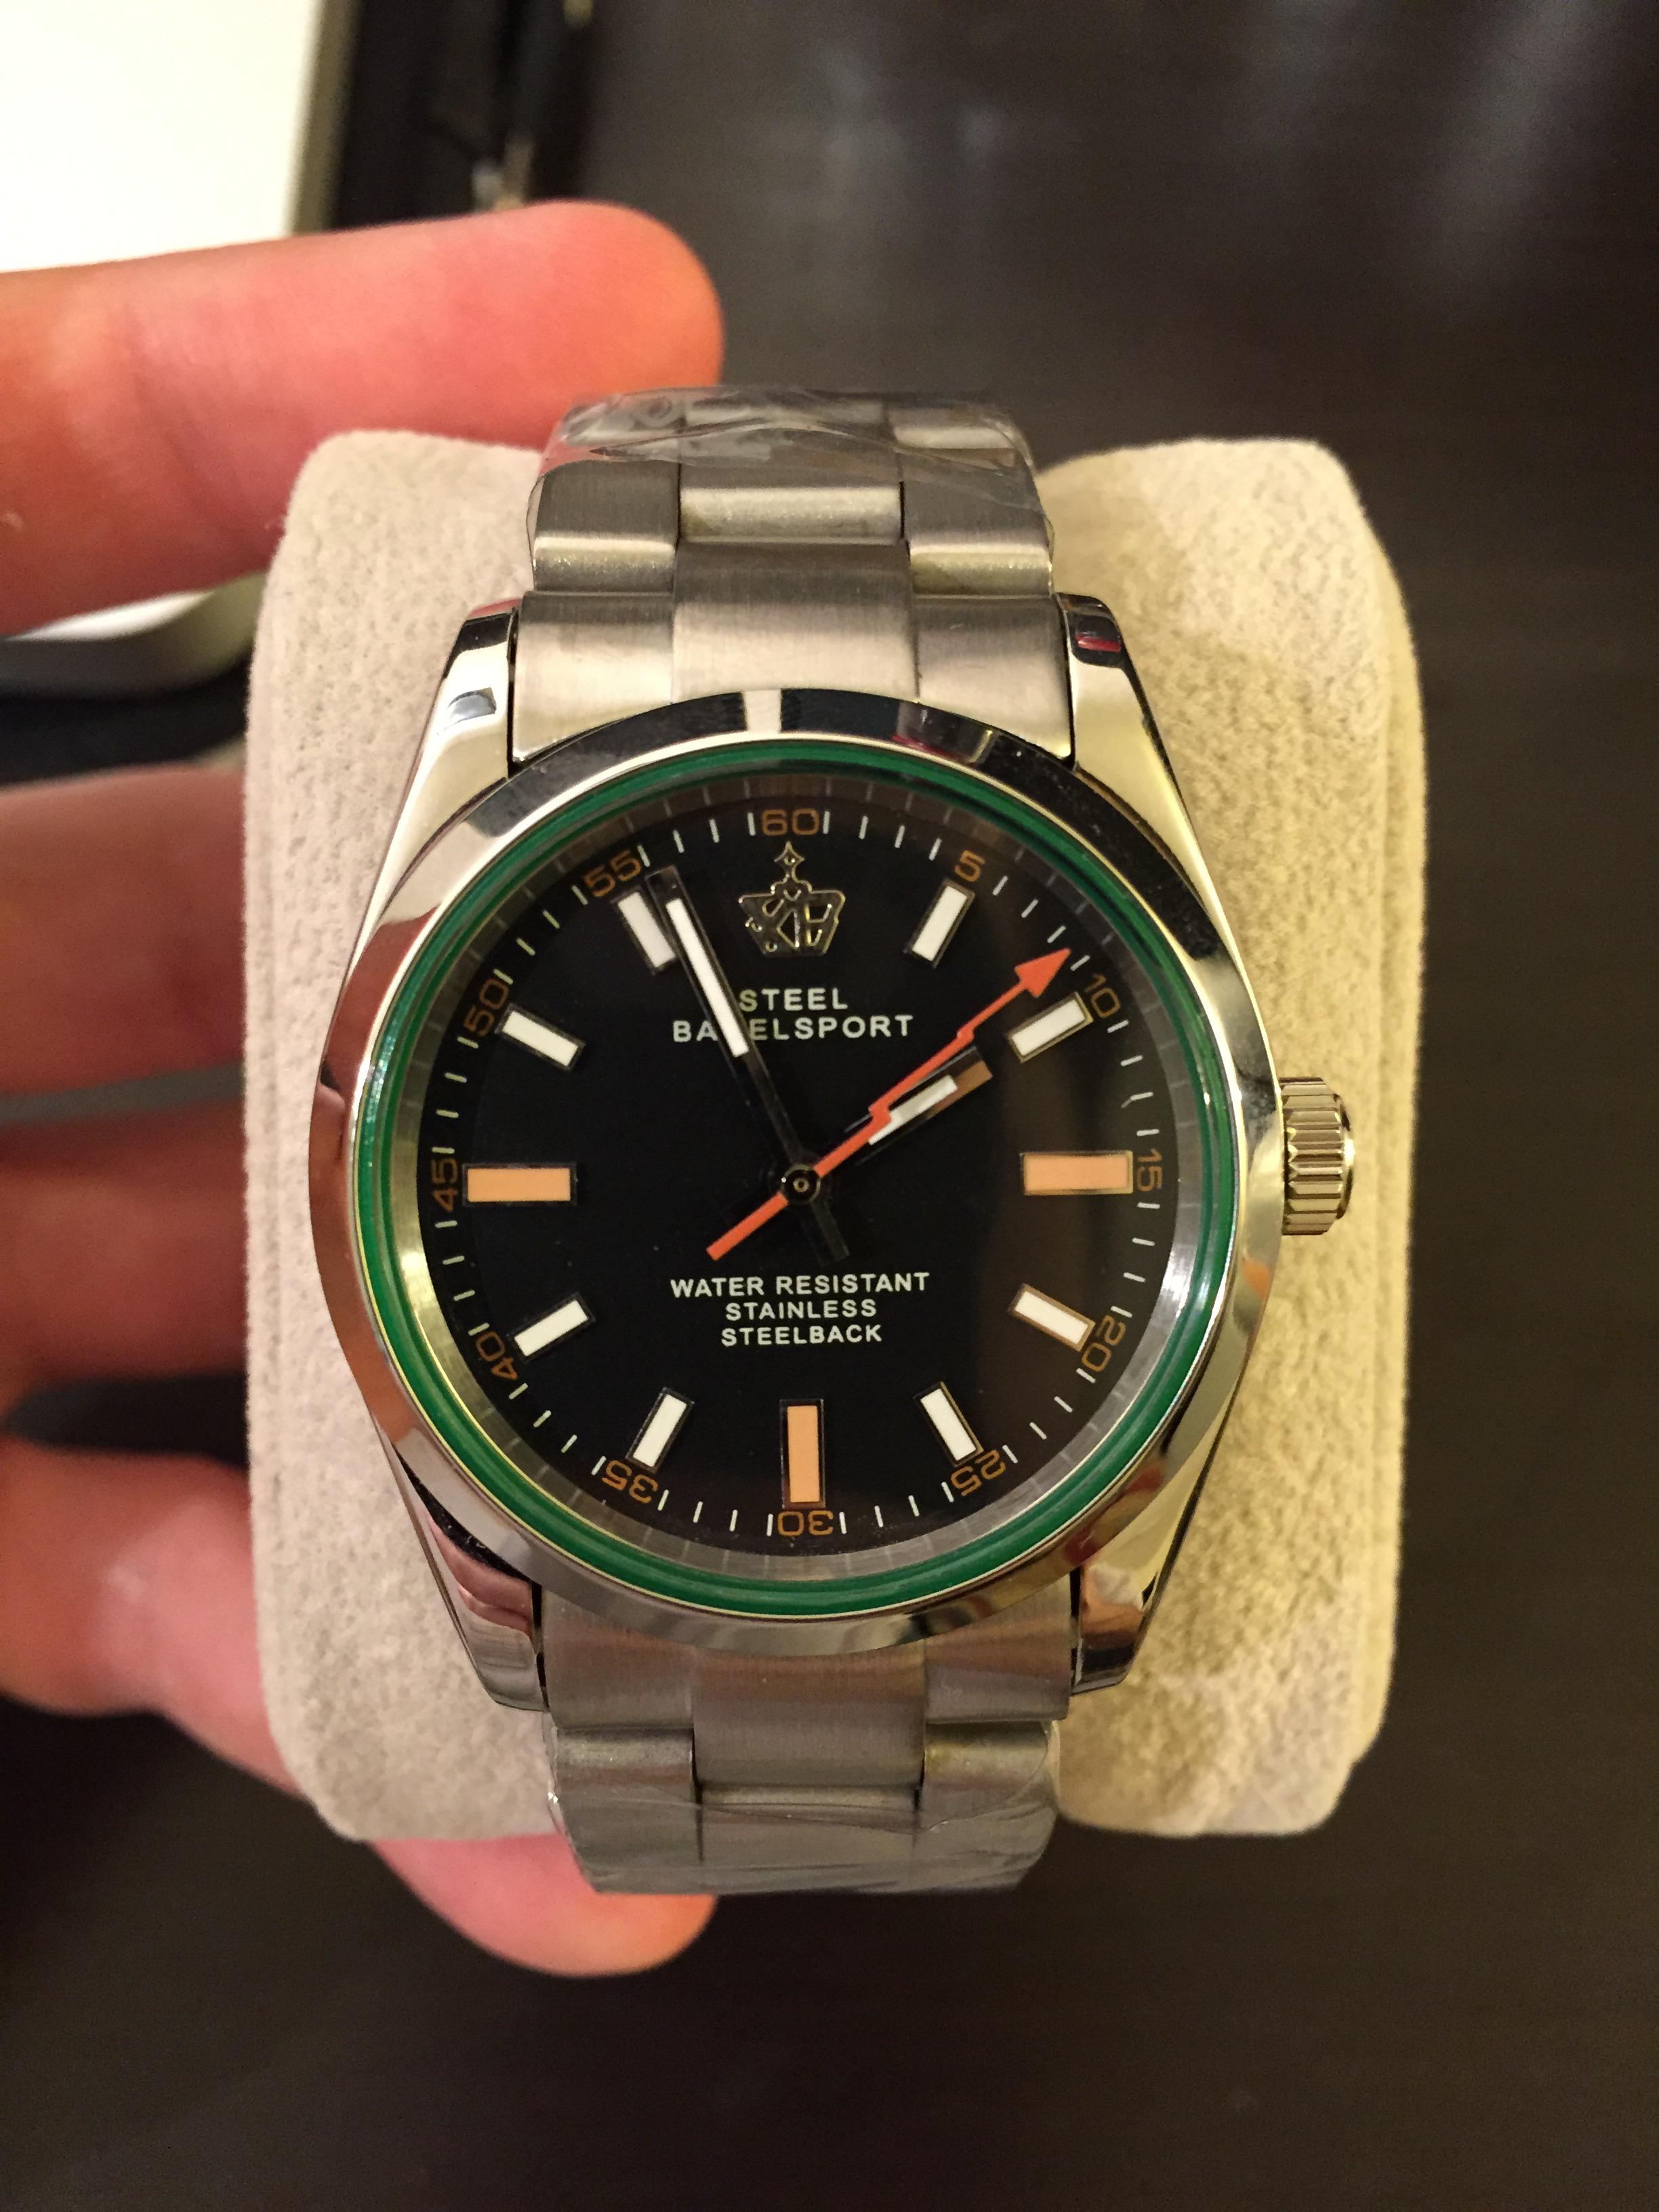 WTS] Bagelsport Milgauss homage for 